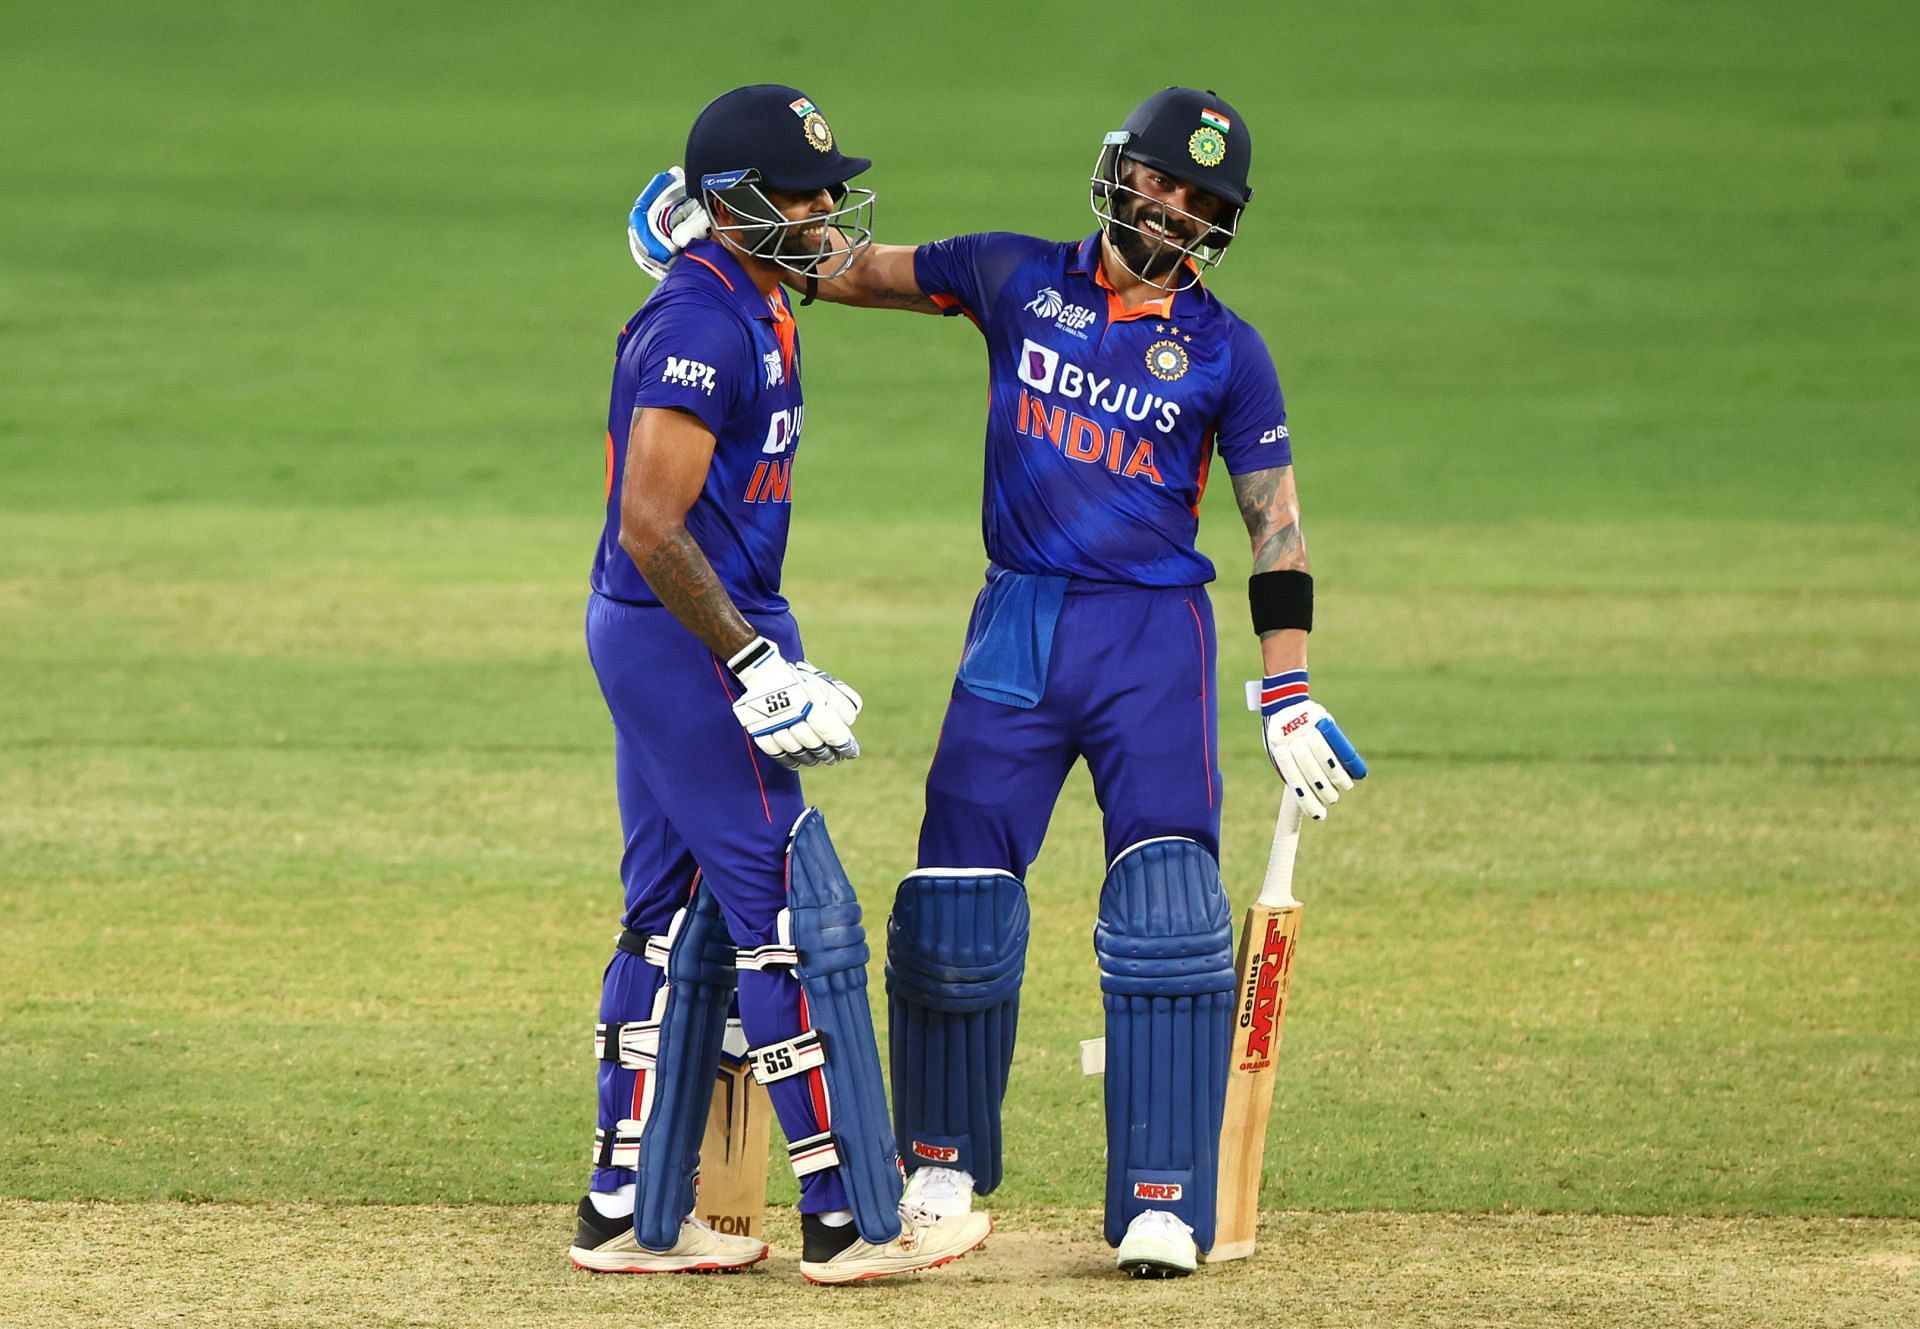 IND vs HKG, Asia Cup 2022: 3 takeaways from India's batting against Hong Kong